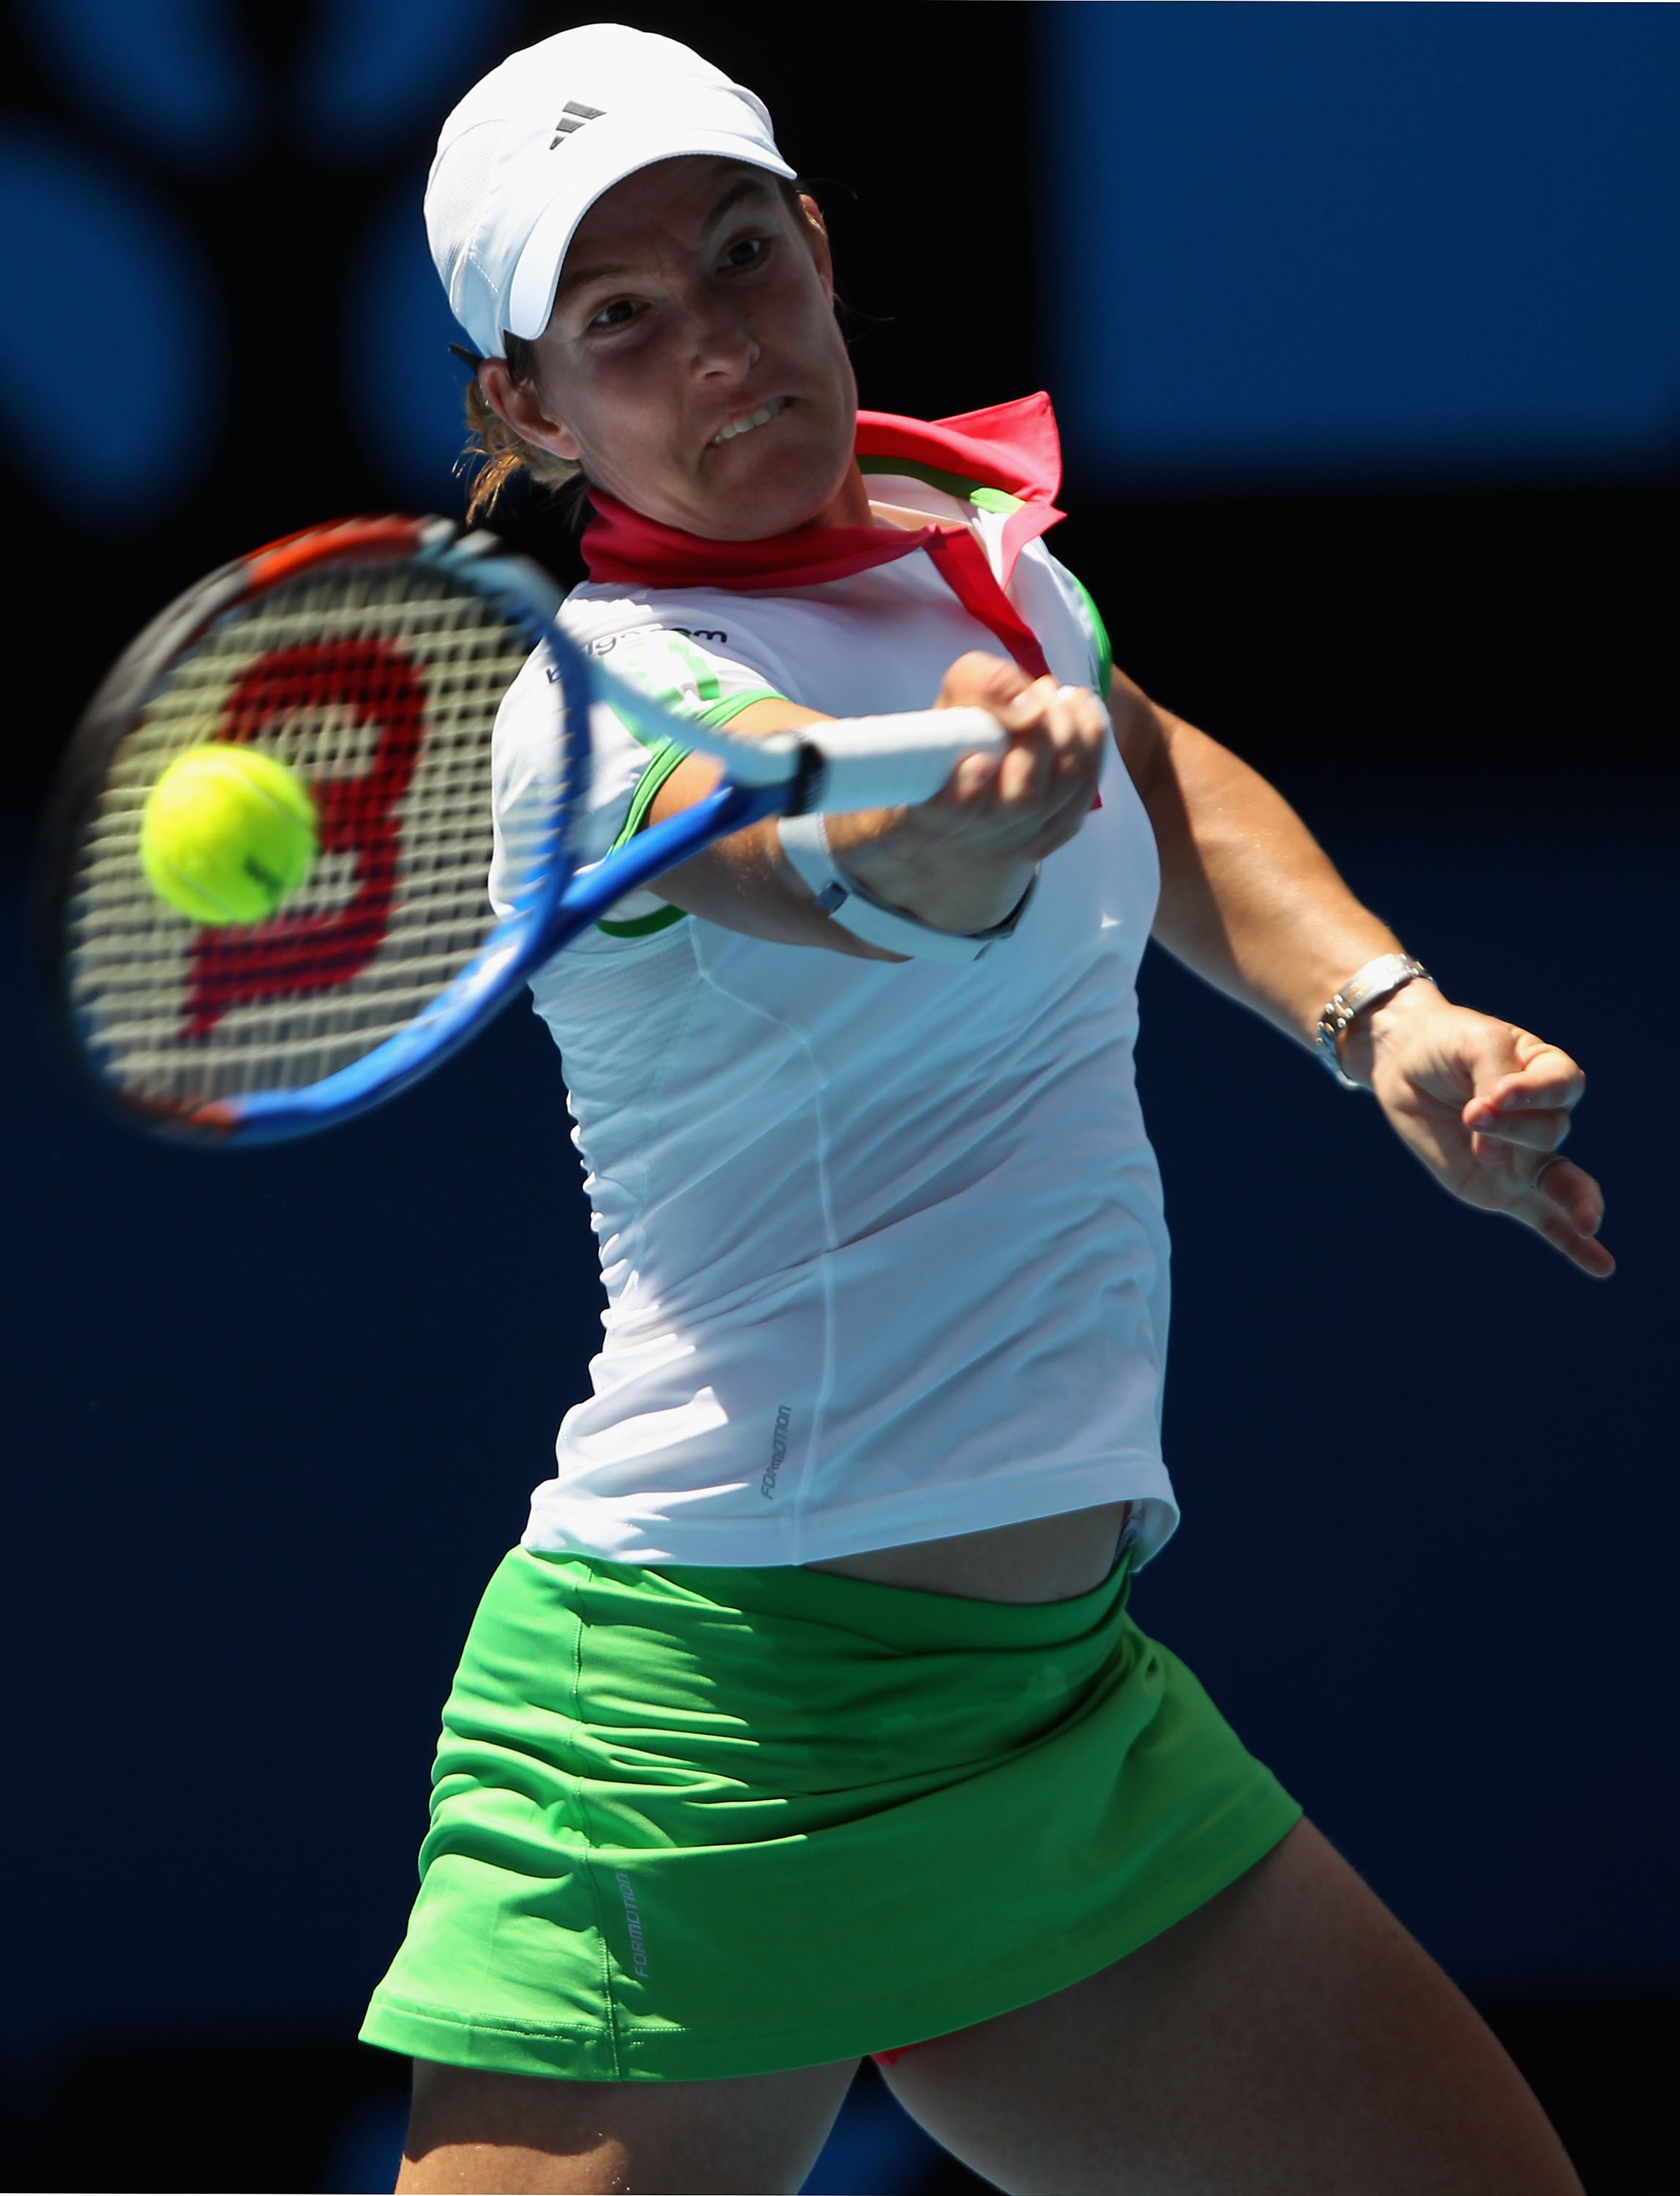 MELBOURNE, AUSTRALIA - JANUARY 21:  Justine Henin of Belgium plays a forehand in her third round match against Svetlana Kuznetsova of Russia during day five of the 2011 Australian Open at Melbourne Park on January 21, 2011 in Melbourne, Australia.  (Photo